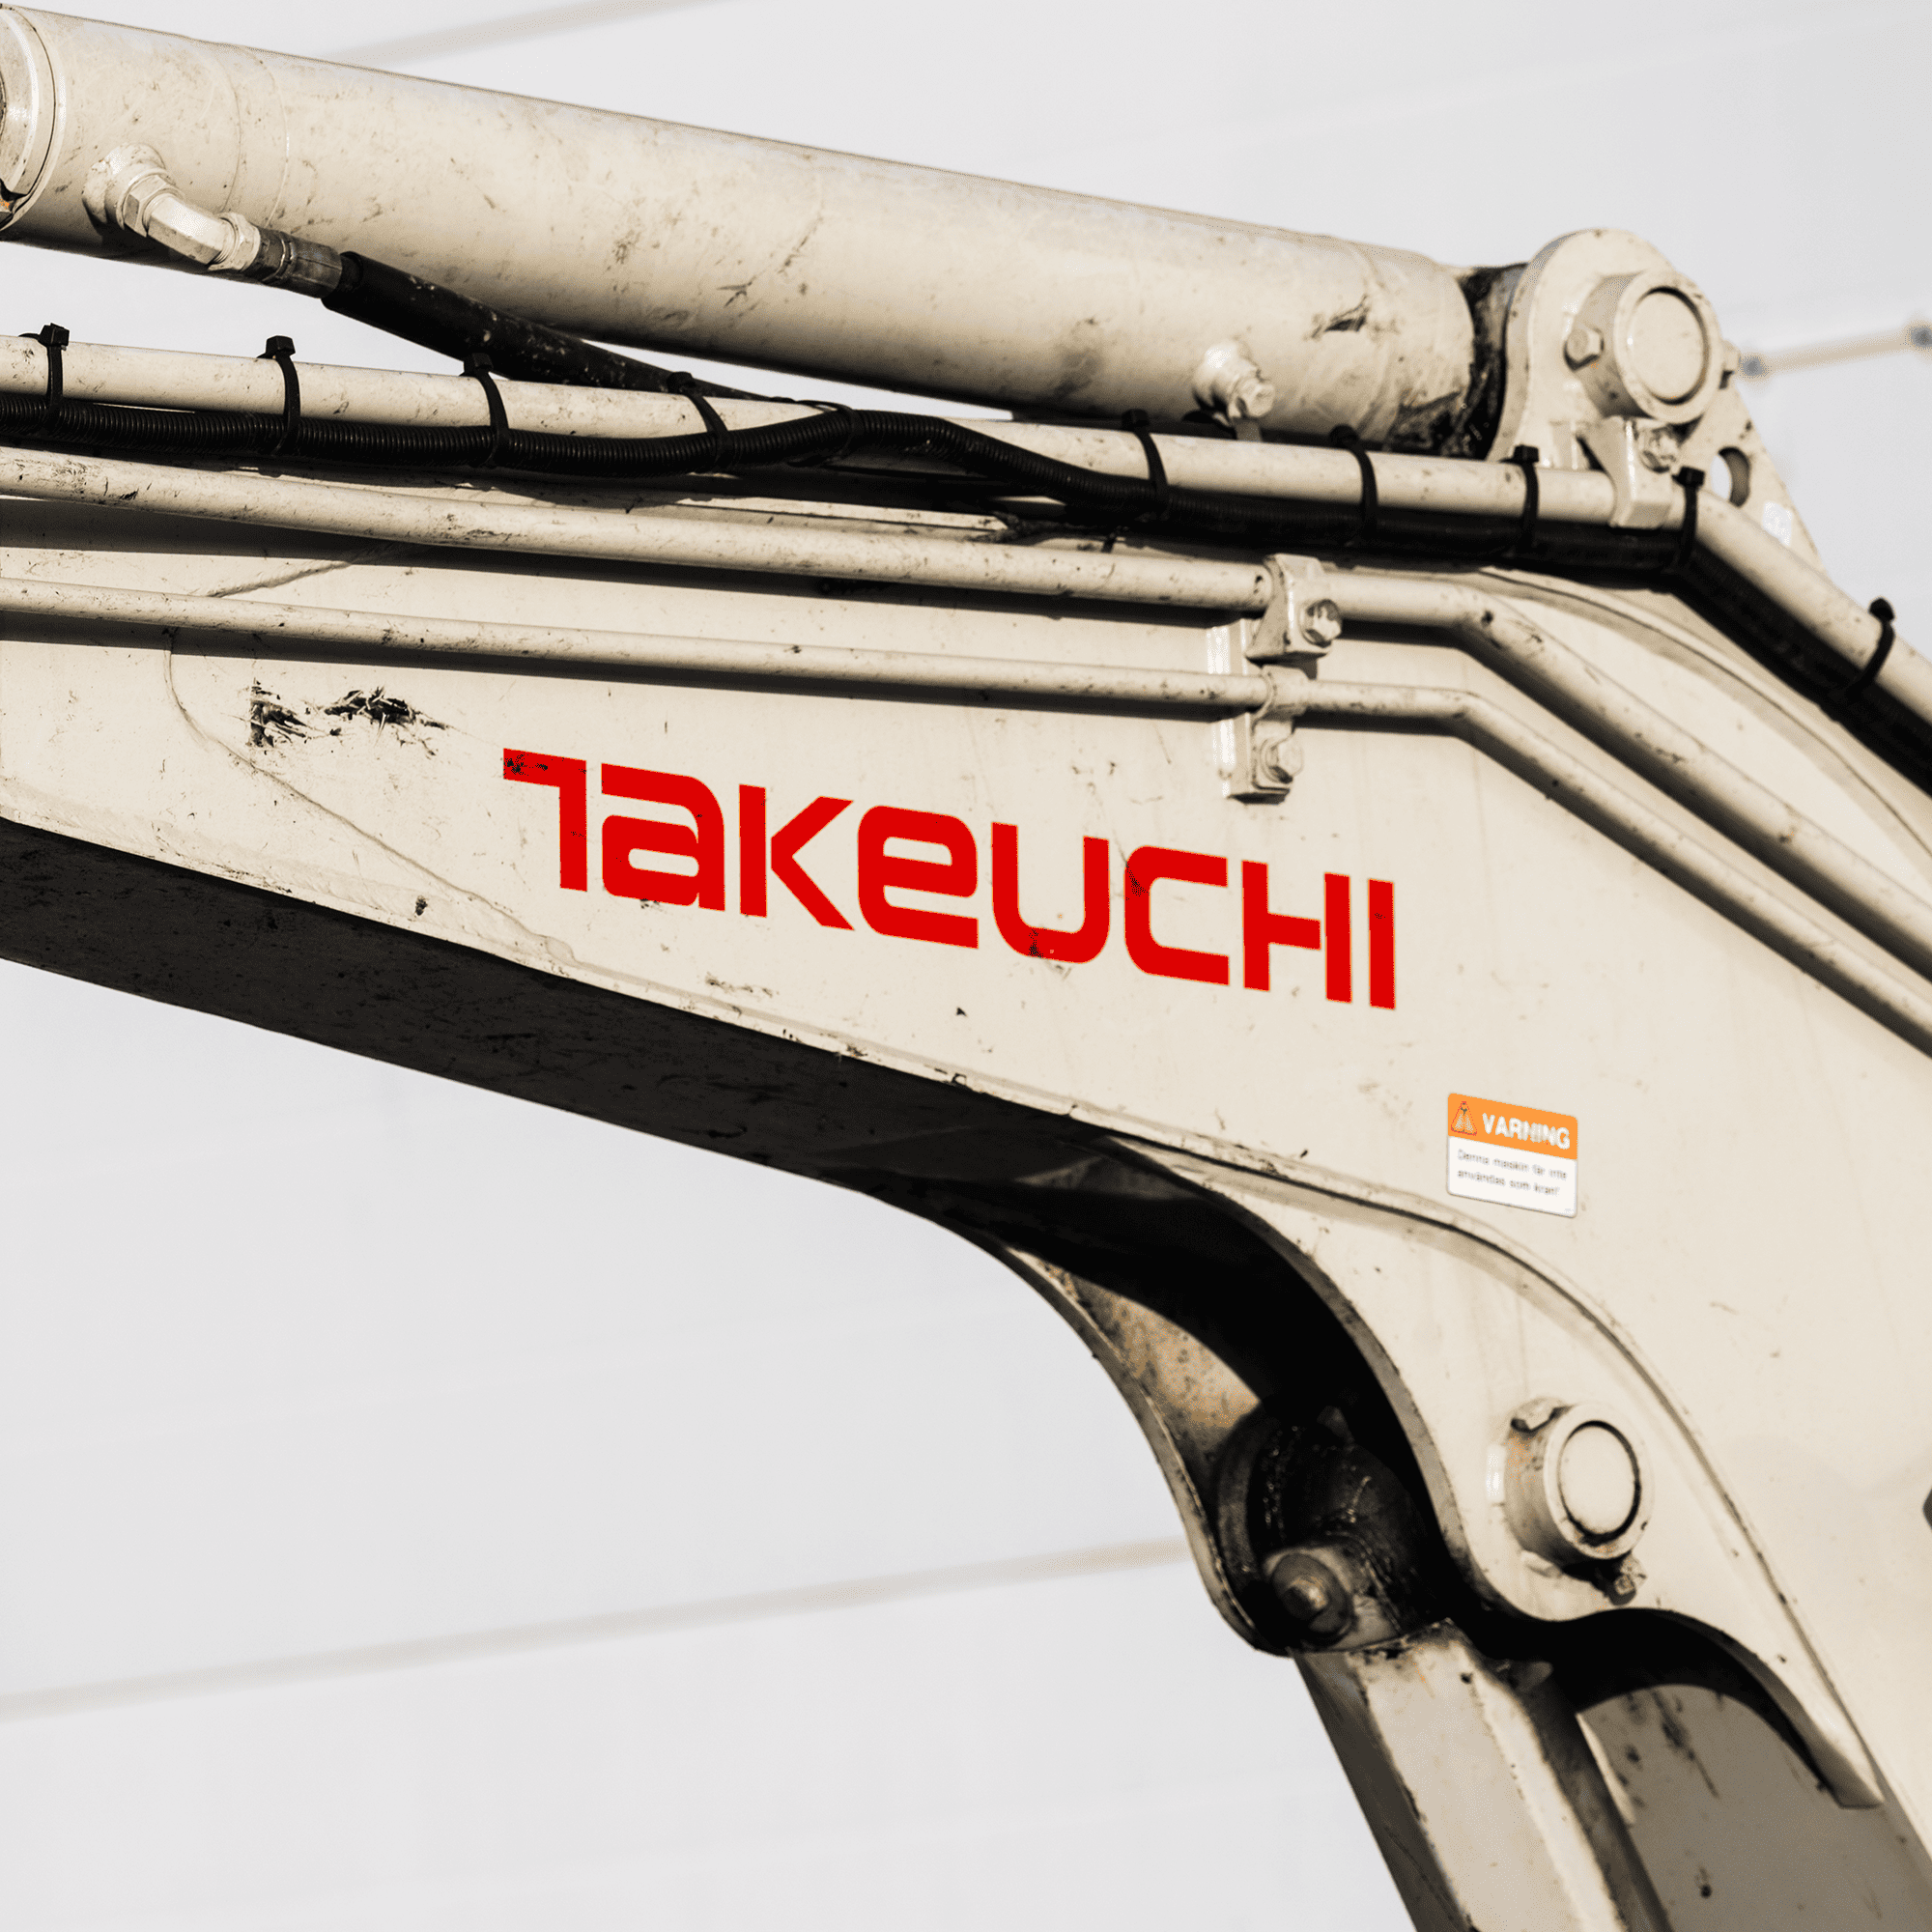 A close up of the red Takeuchi logo on a white heavy machine arm